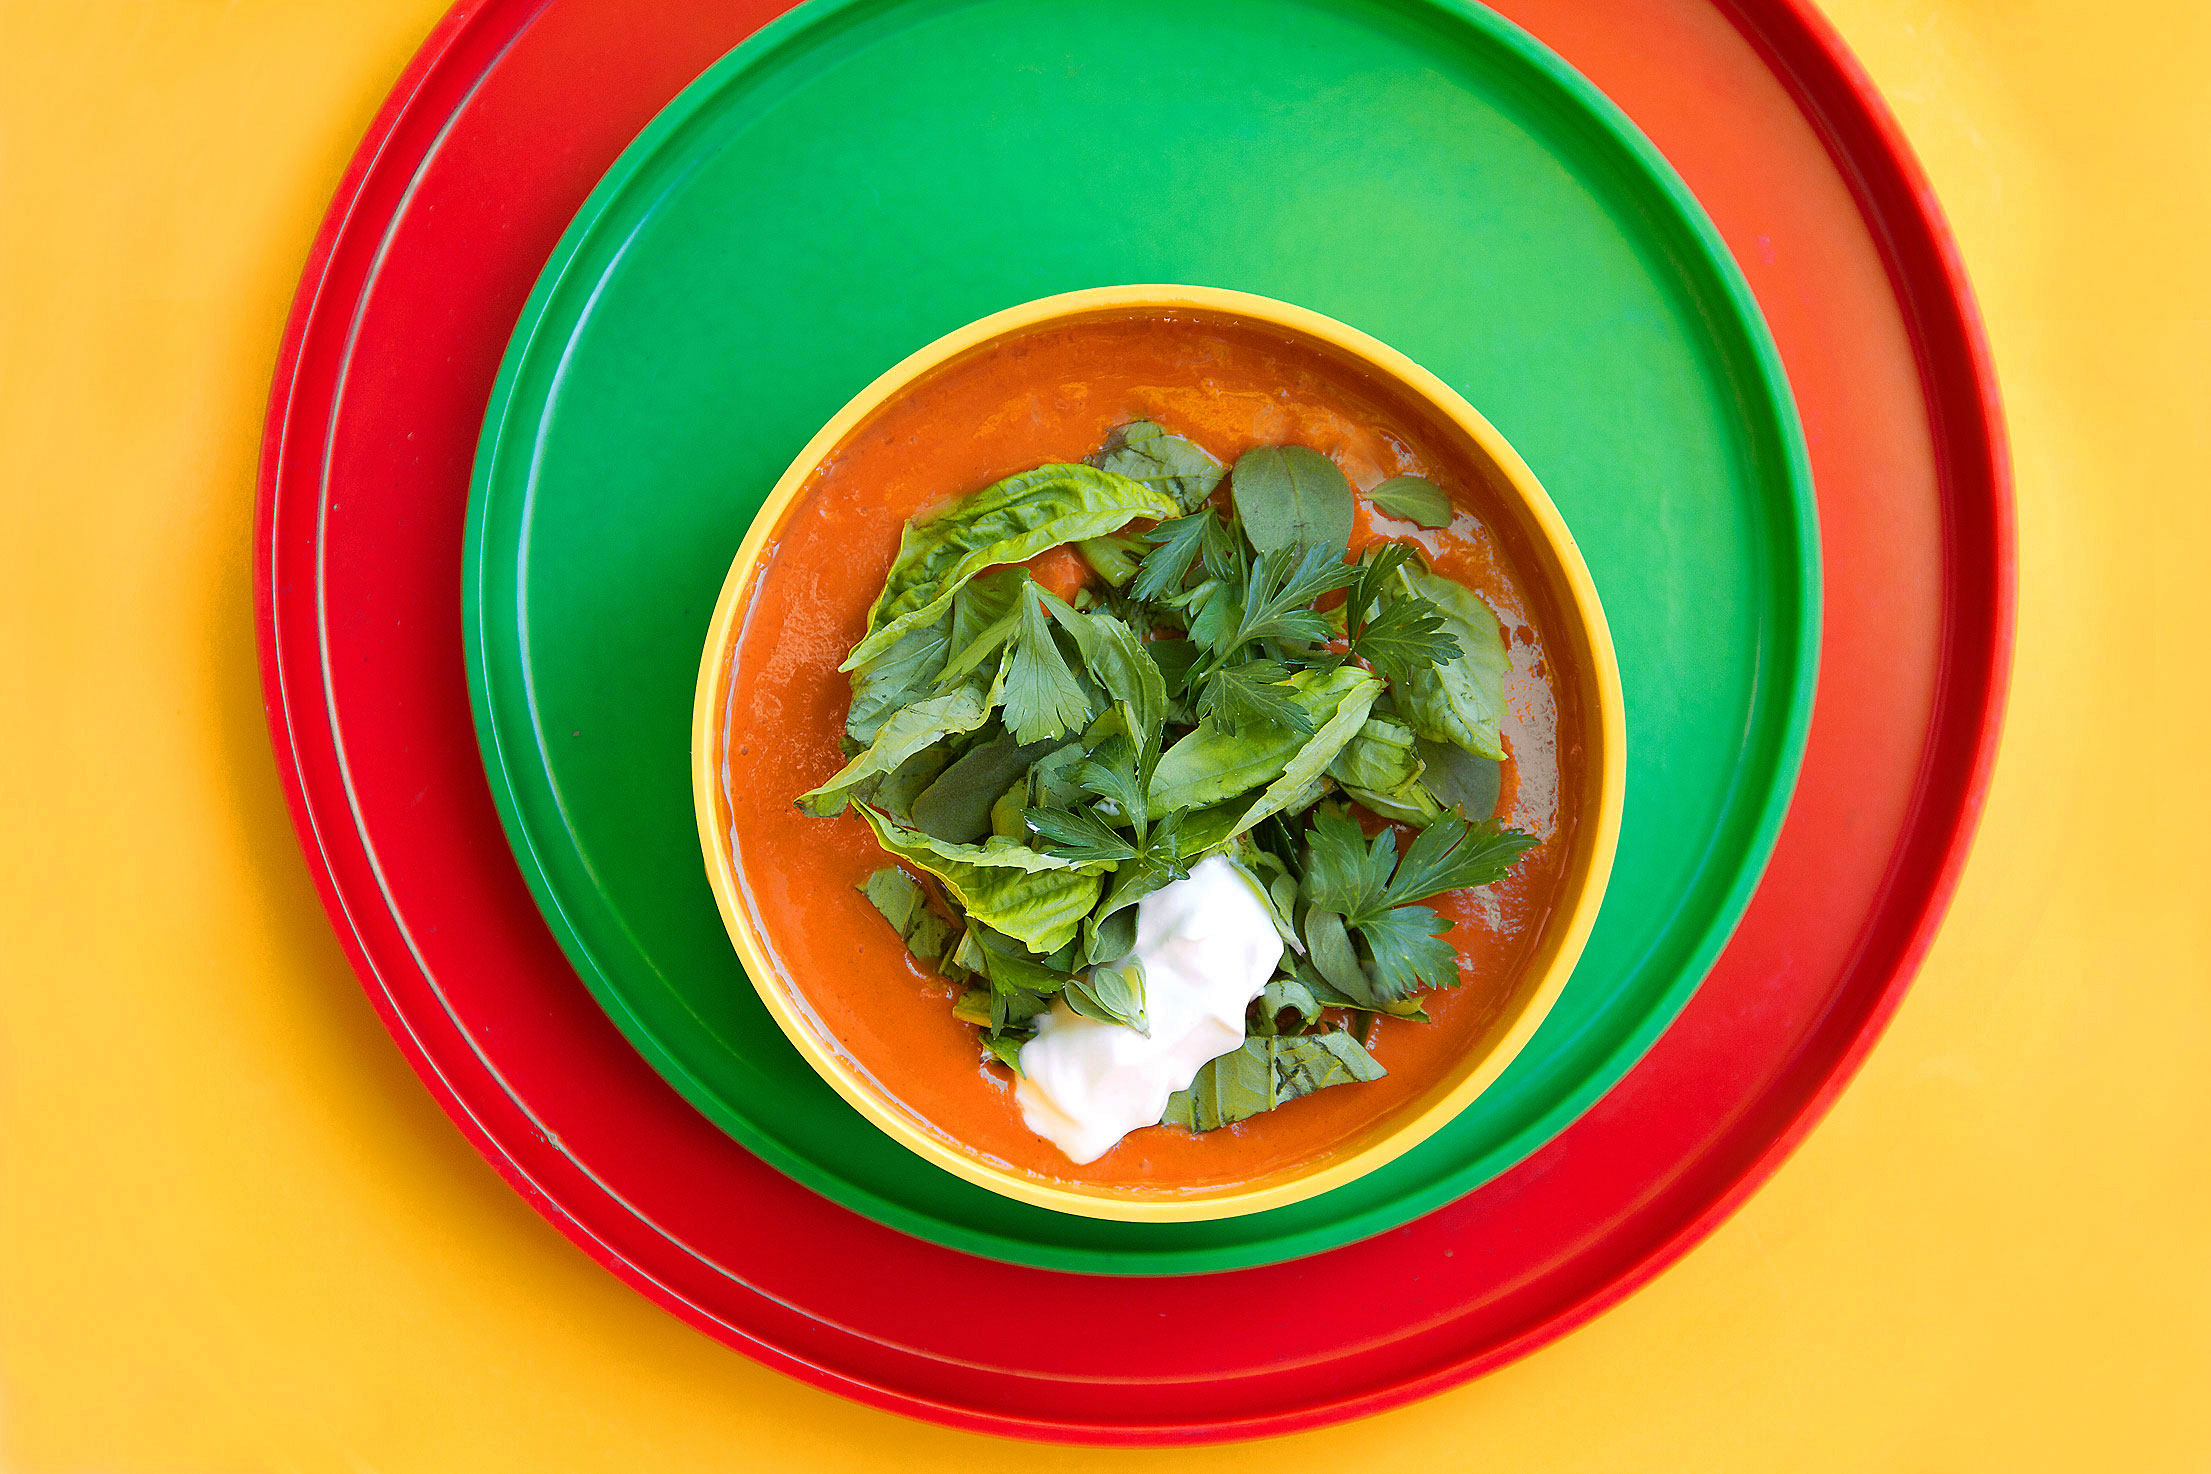 Herb-Topped Chilled Red Bell Pepper Soup